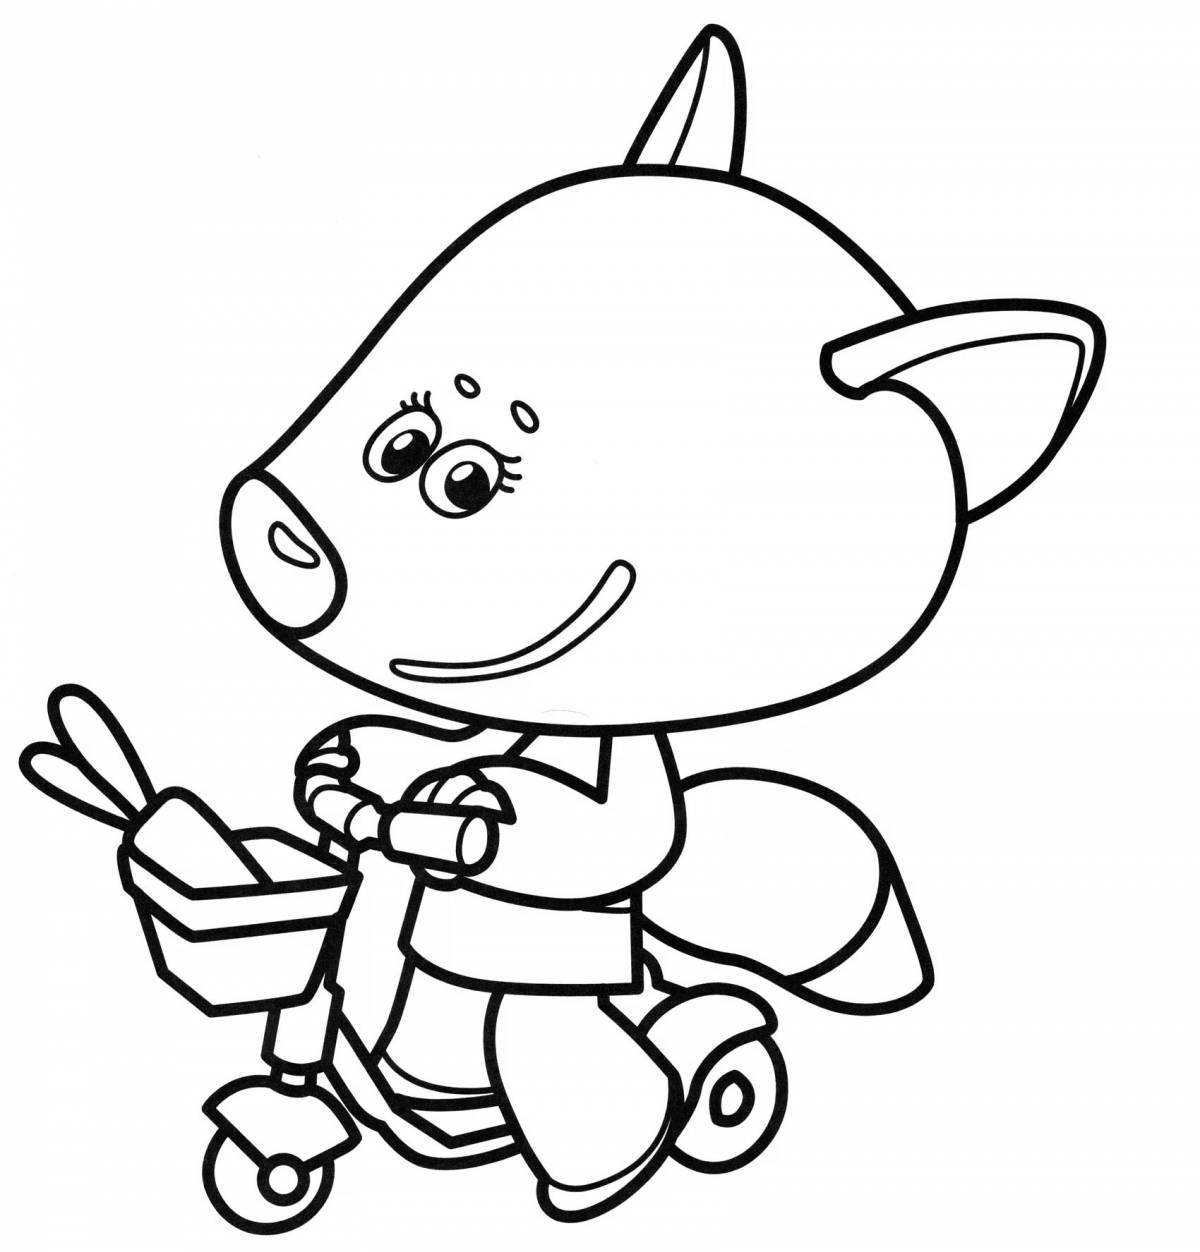 Imitation coloring pages for android